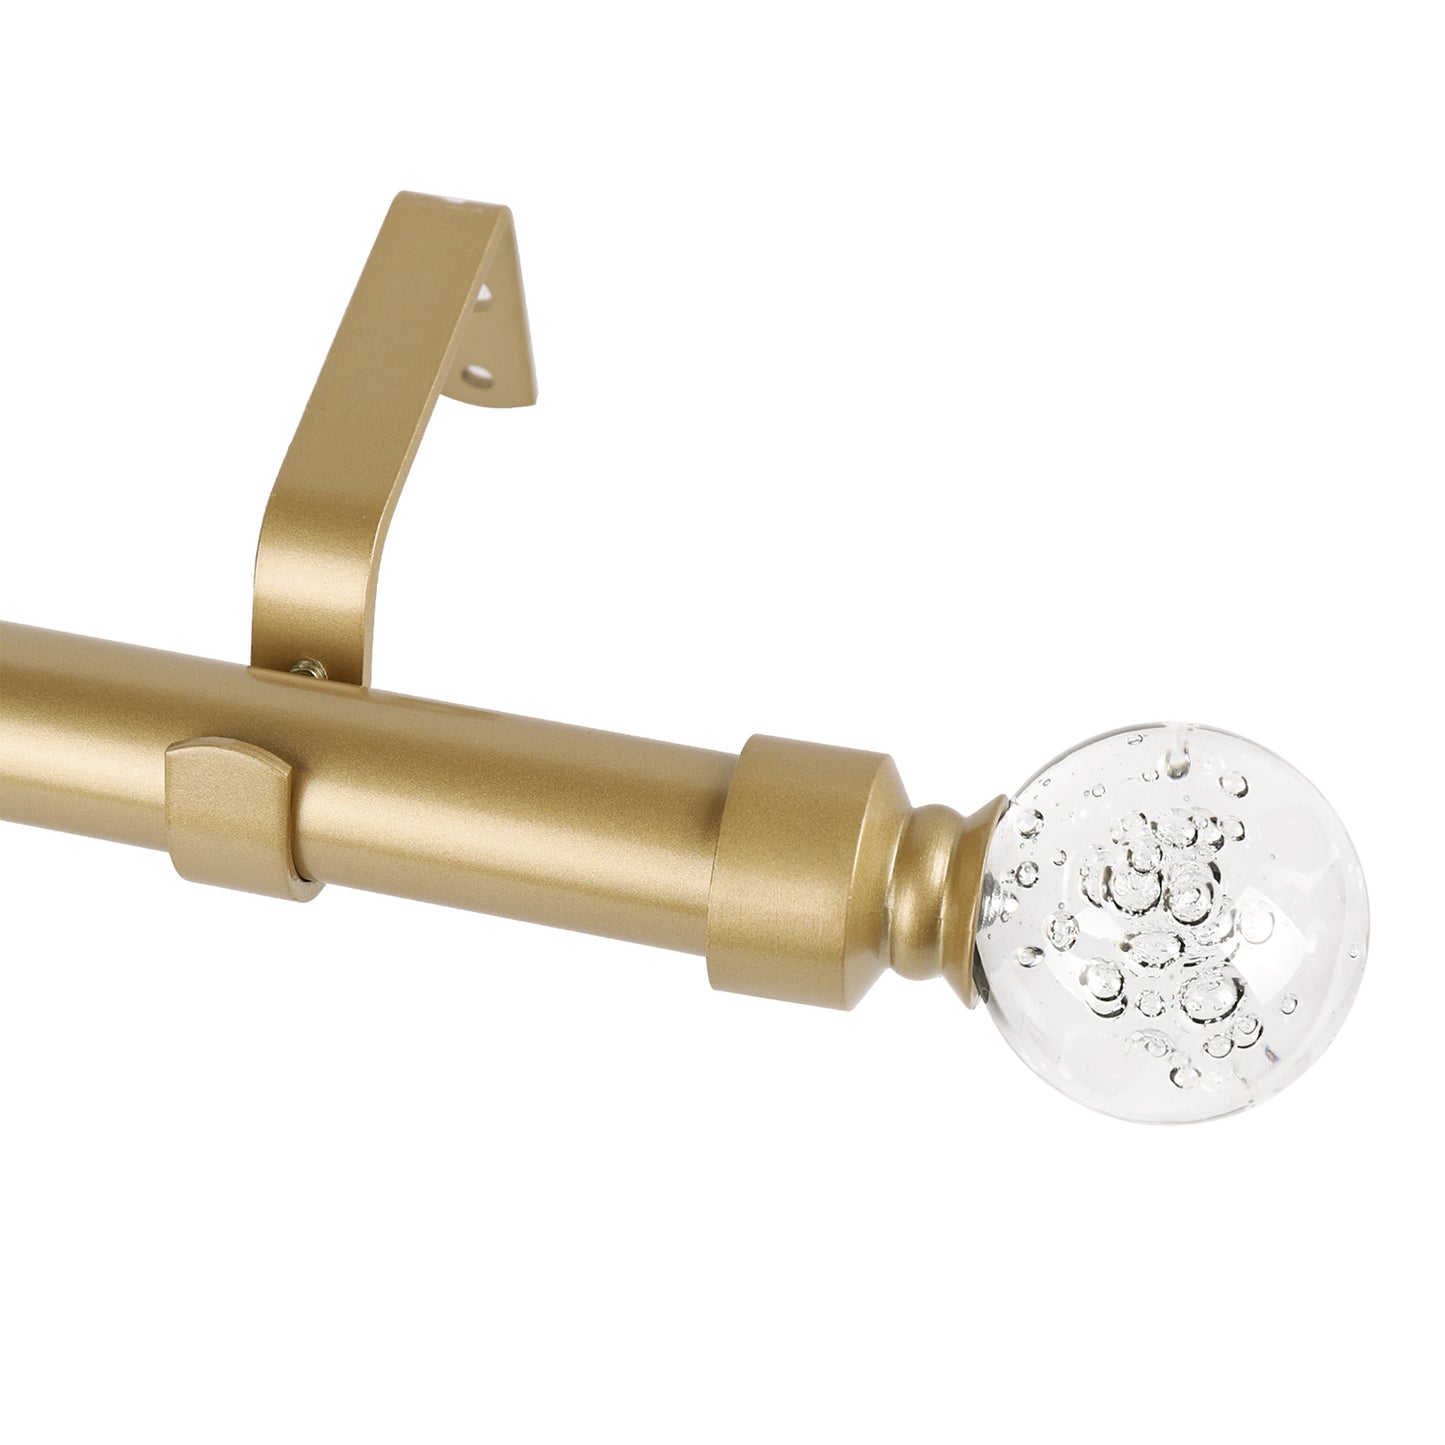 1 Inch Brass Adjustable Drapery Rod with Crystal Ball Finials, 22 to 86 Inches